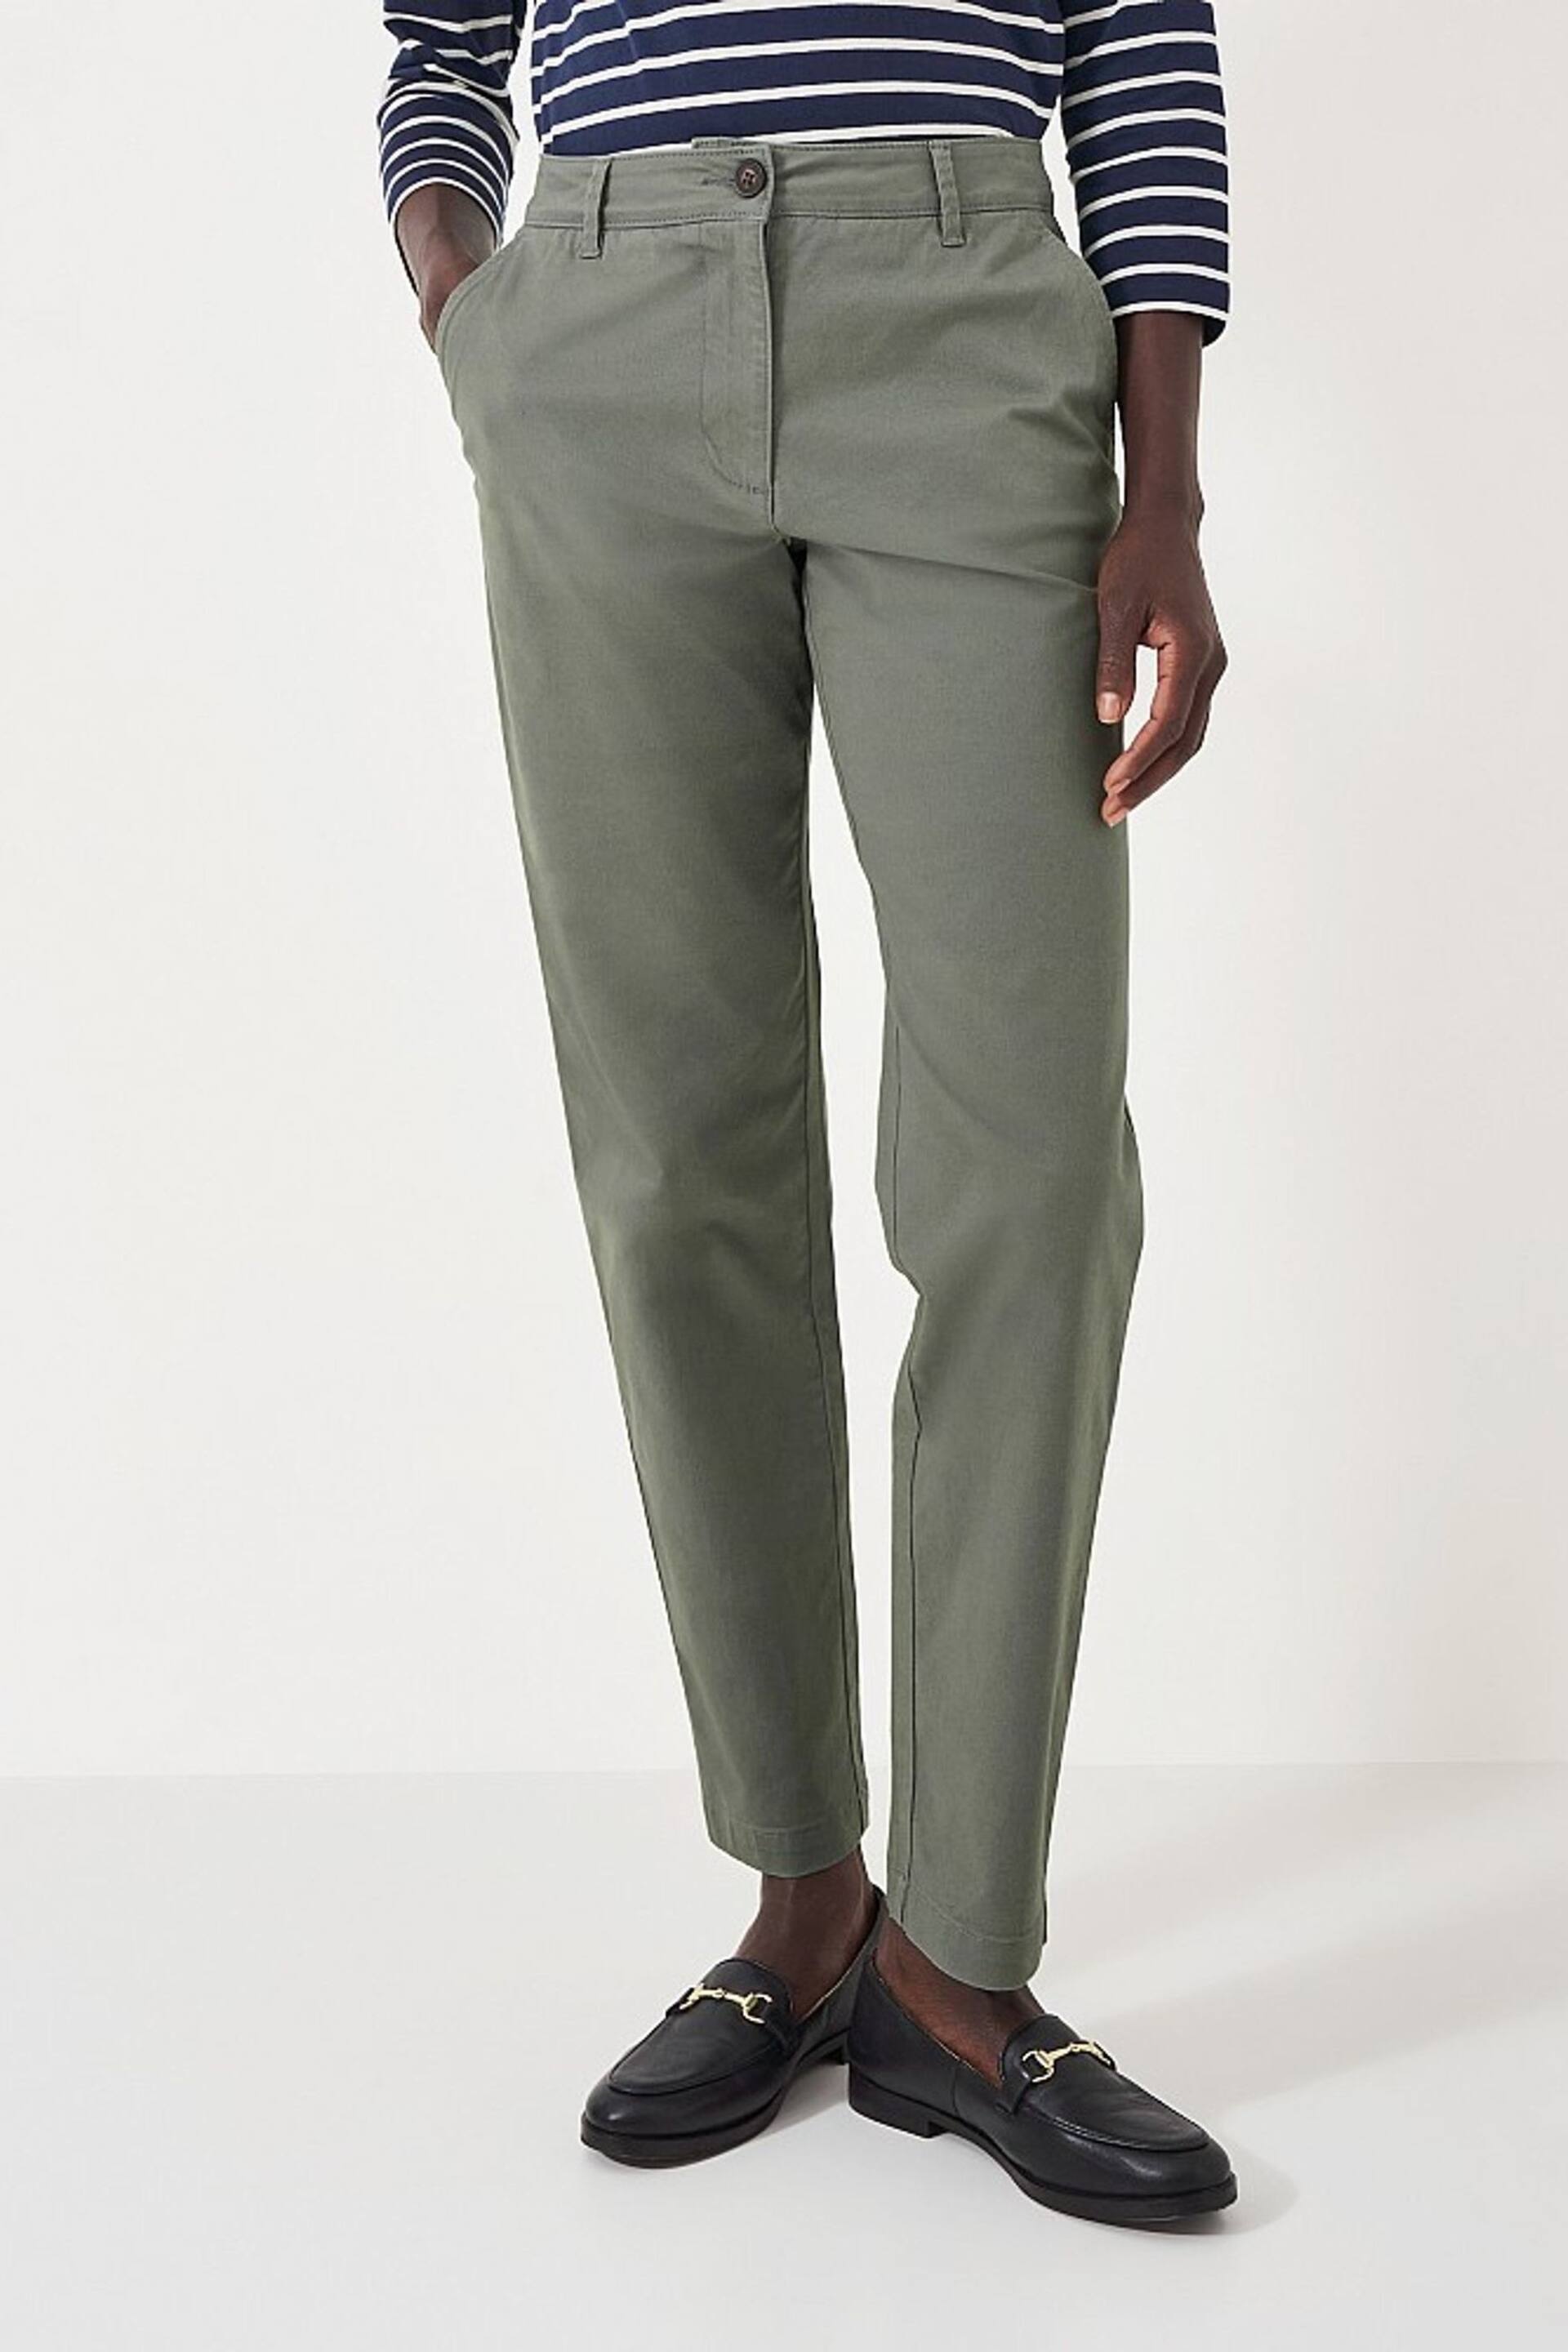 Crew Clothing Salcombe Chino Trousers - Image 3 of 5